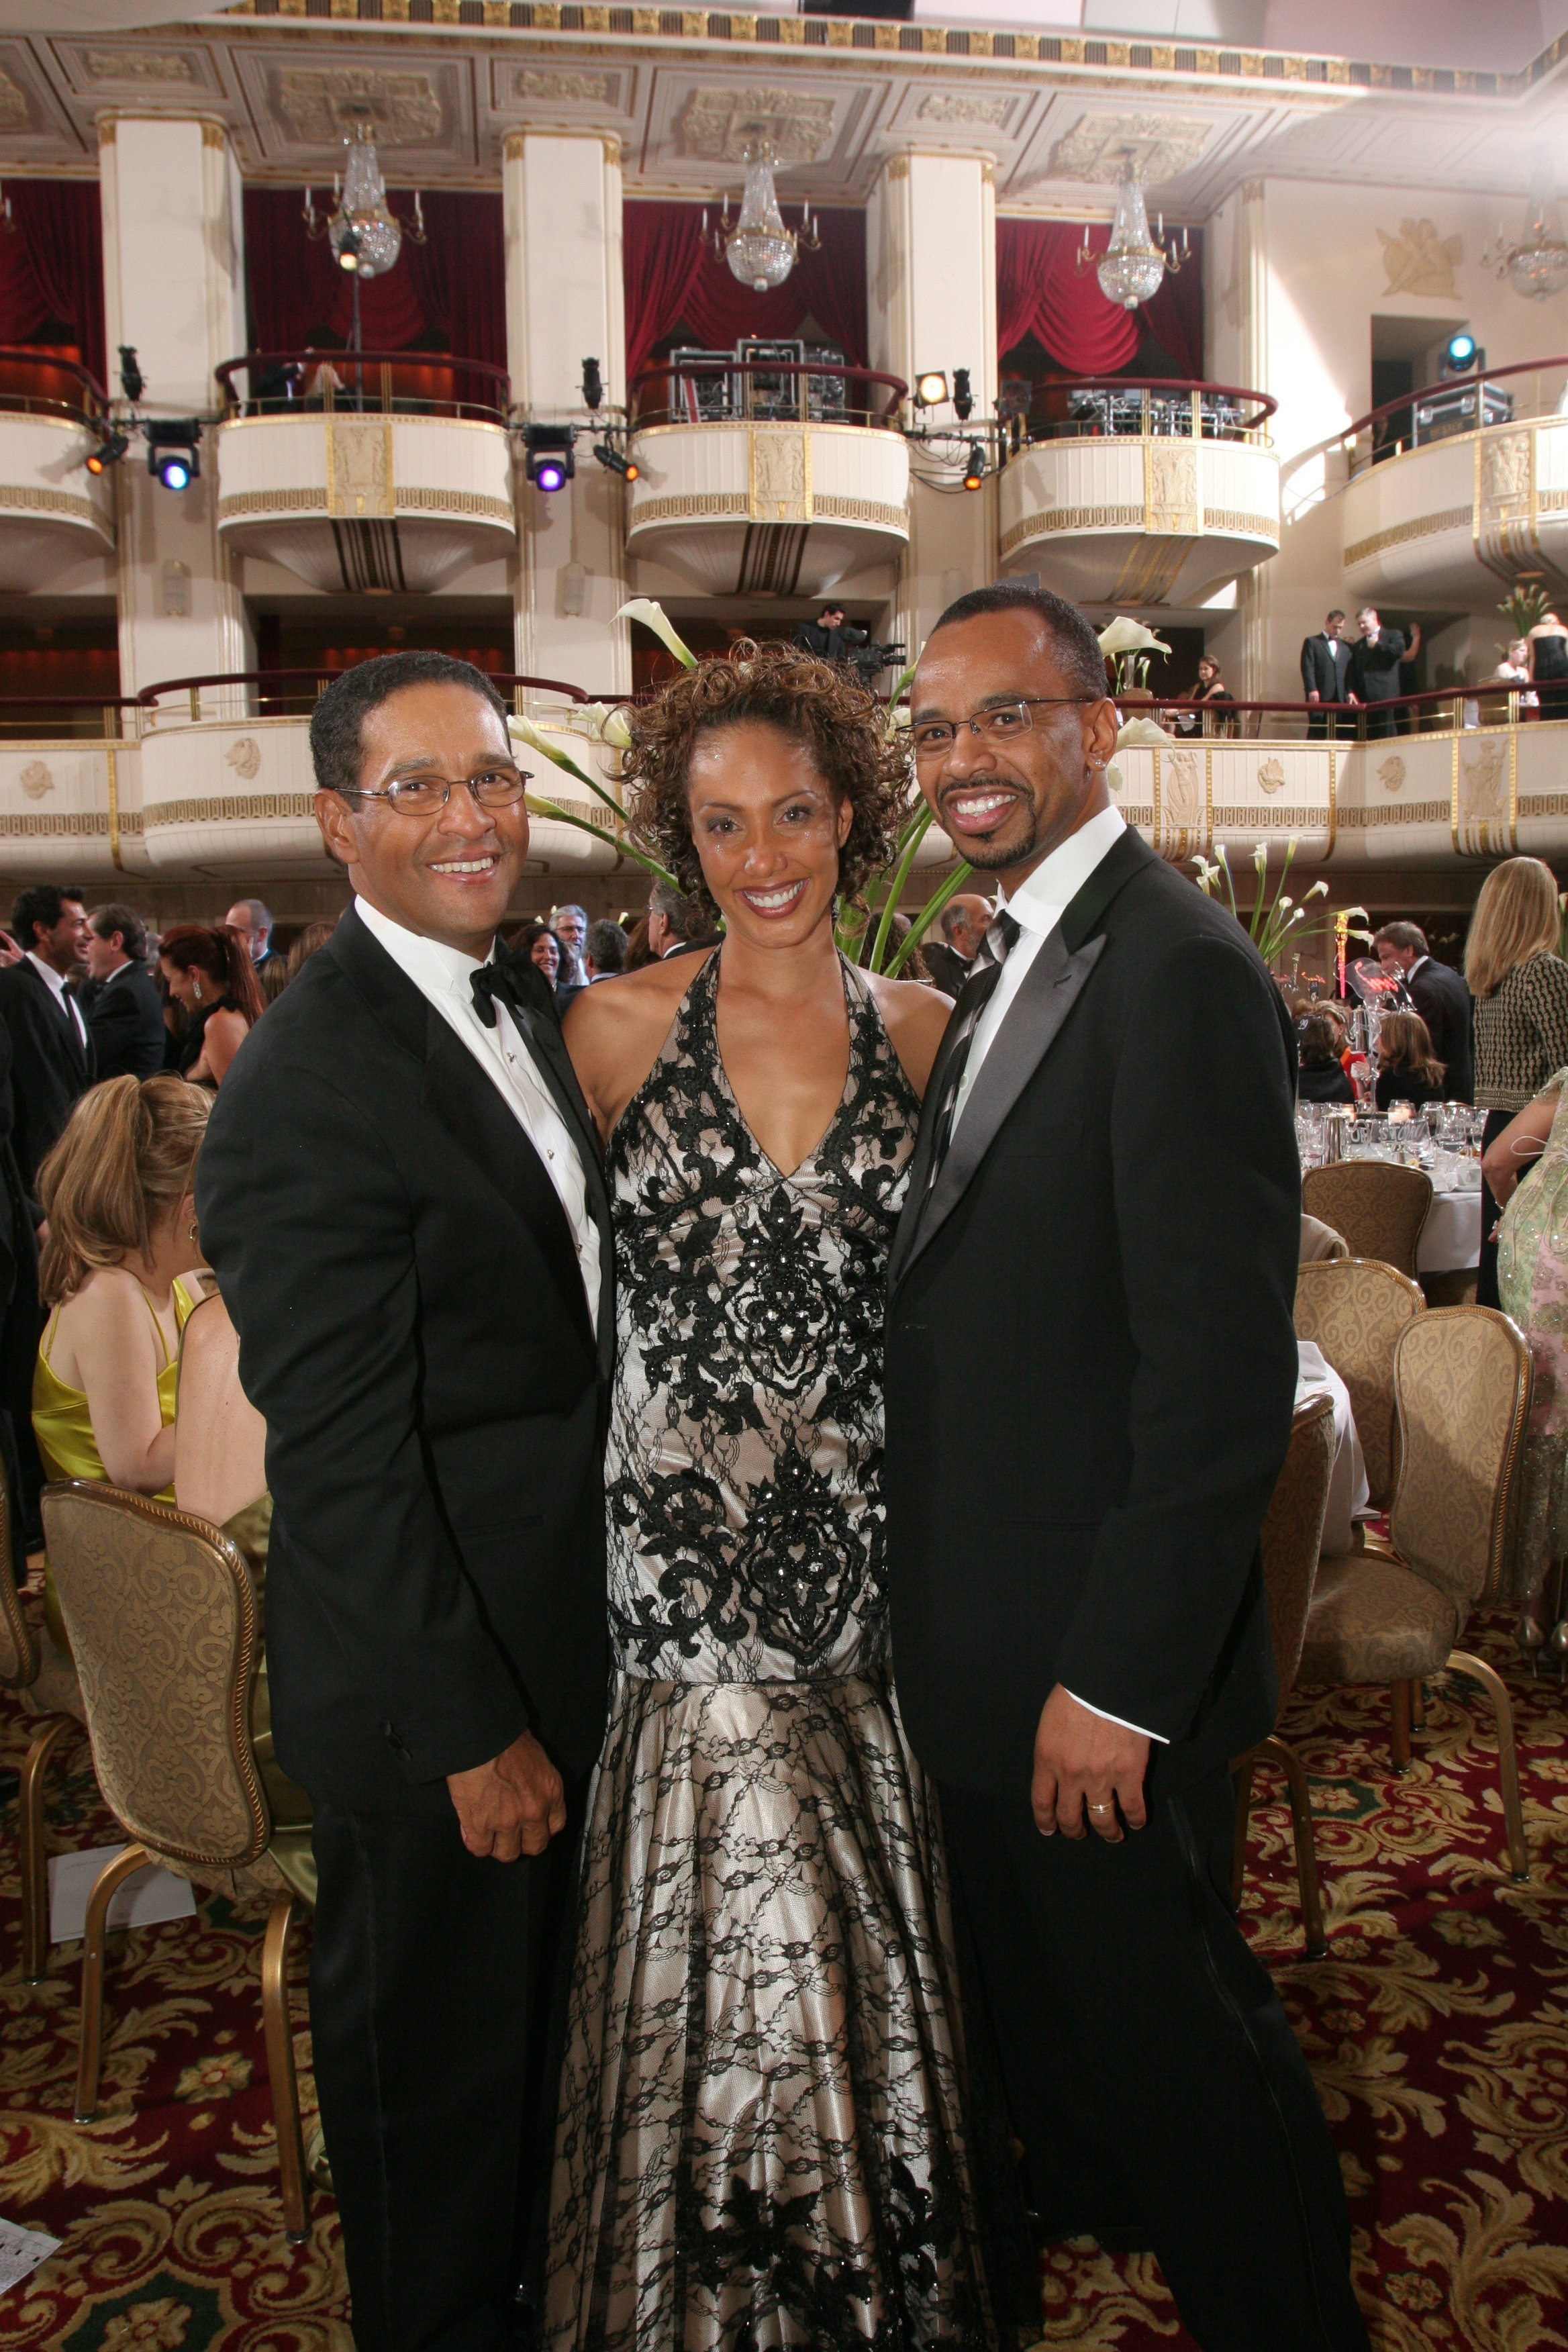 Joan Baker arm and arm with Bryant Gumbel and husband Rudy Gaskins- Guests of the Rita Hayworth Gala at the Waldorf Astoria.